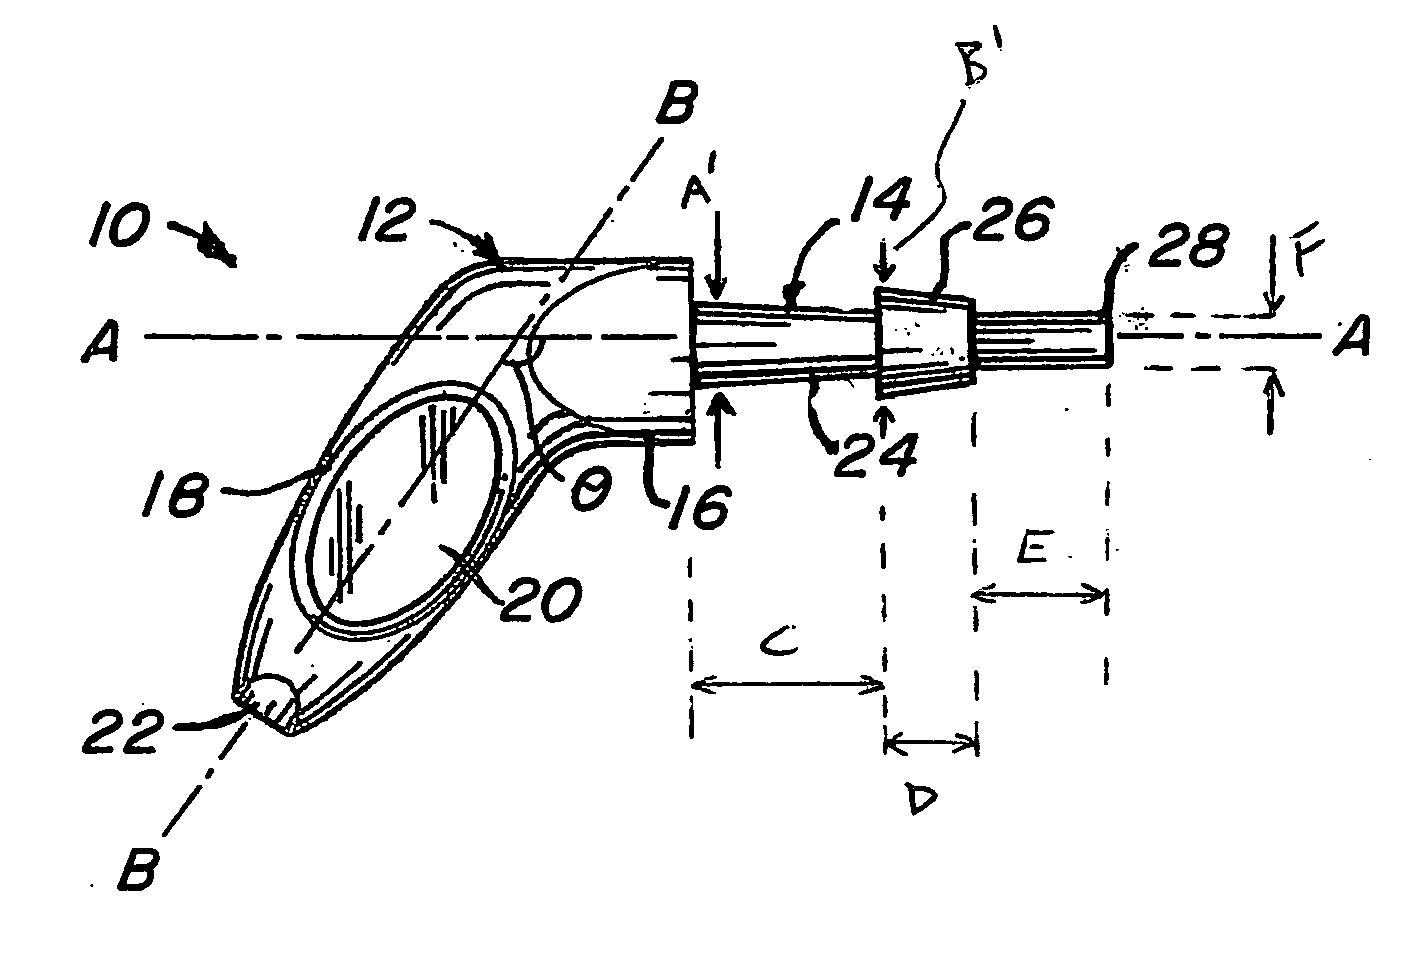 Earplug with articulating stem and locking features